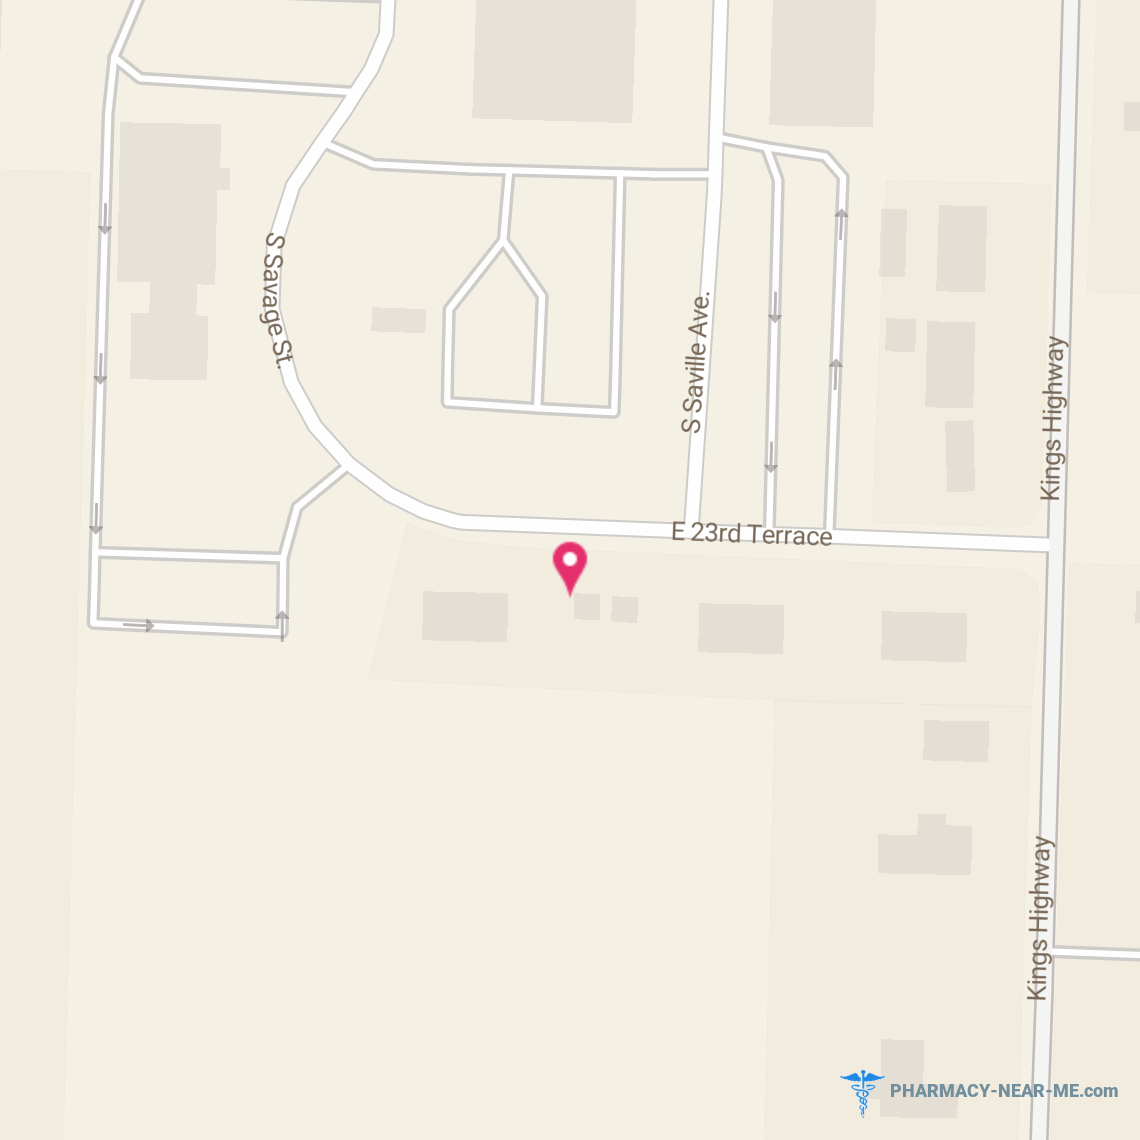 WALGREENS #04224 - Pharmacy Hours, Phone, Reviews & Information: 1536 East 23rd Street South, Independence, Missouri 64055, United States